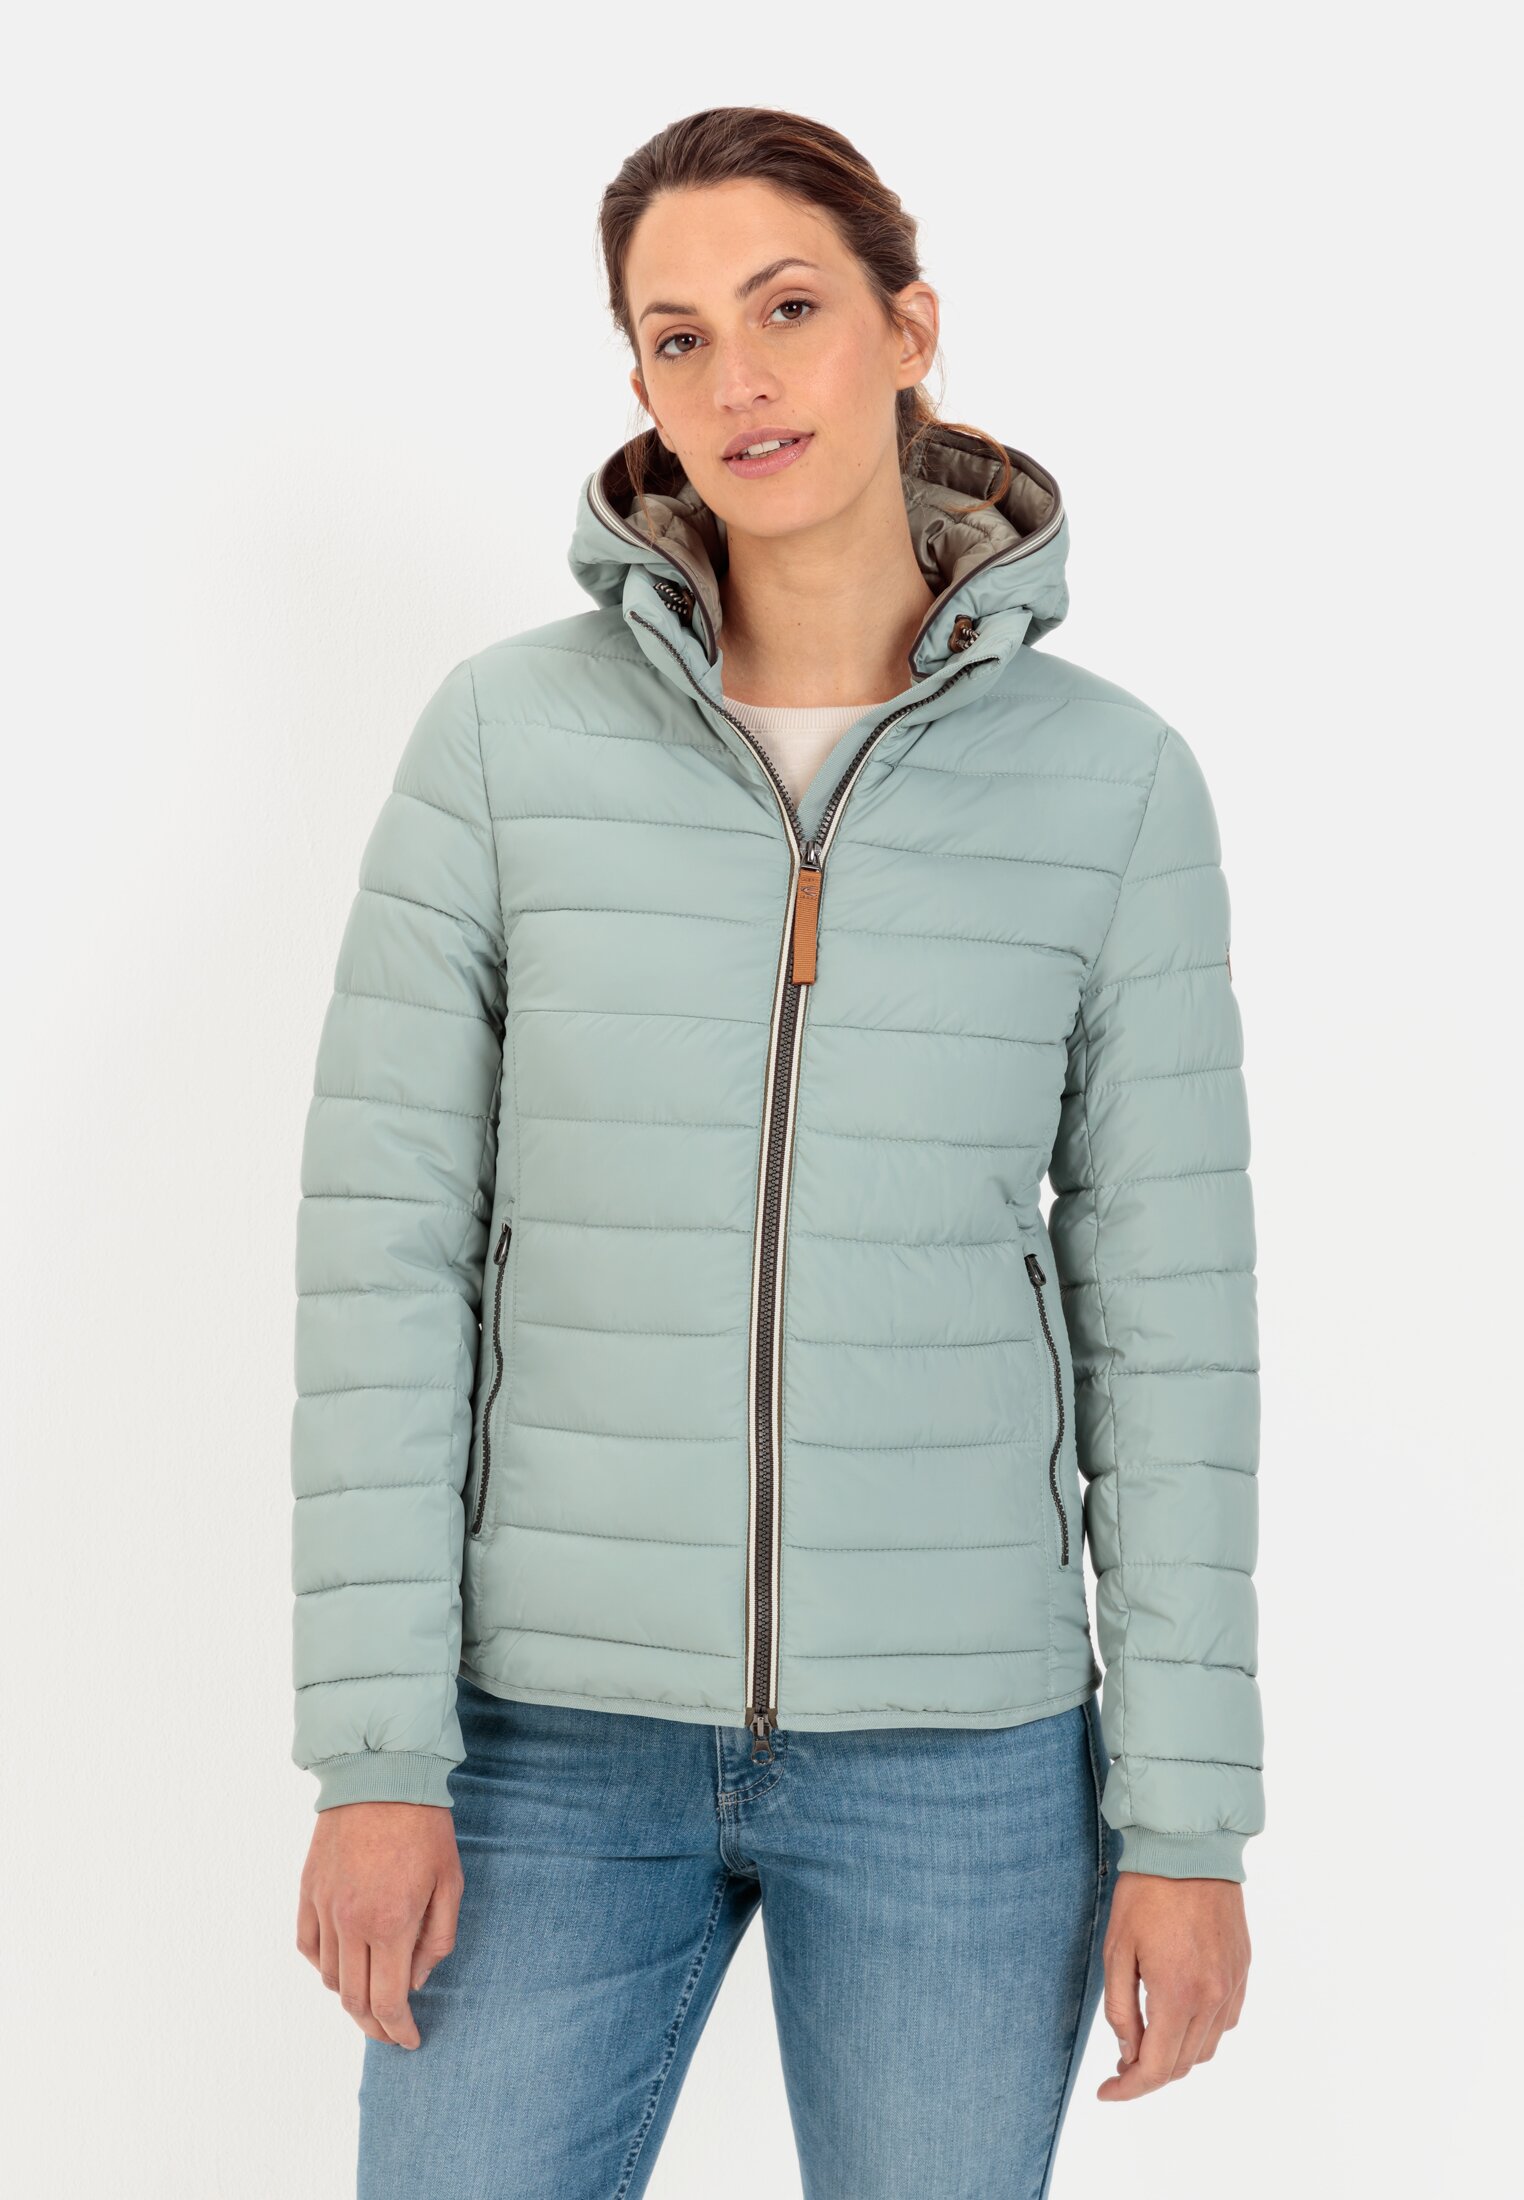 Quilted jacket for Damen in Green Grey | 34 | camel active